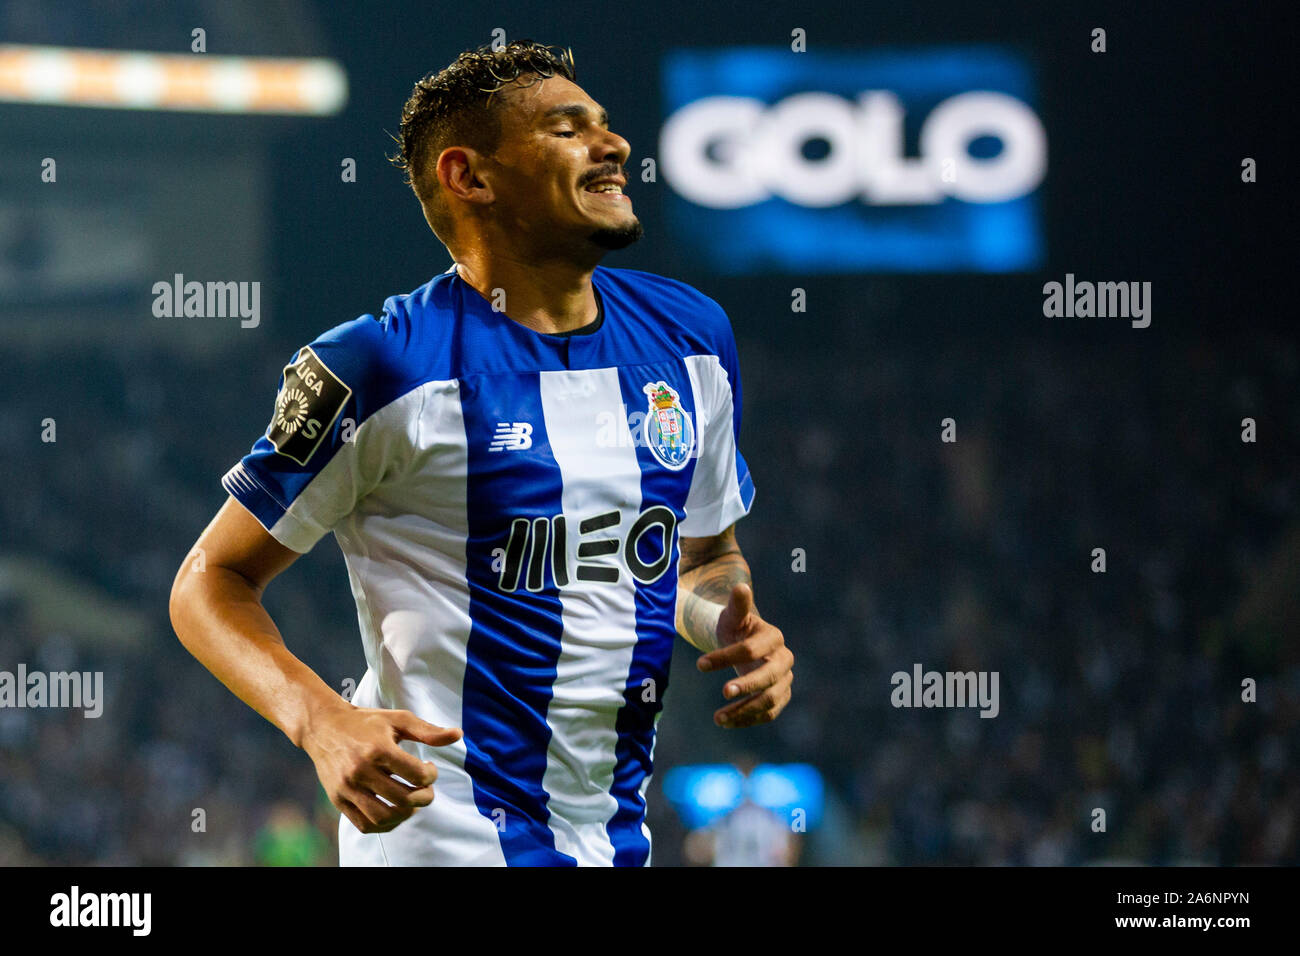 Porto, Portugal. 27th Oct, 2019. FC Porto's player Francisco Soares celebrates a goal during the 8 round match for the portuguese first league between FC Porto and FC Famalicão at Dragon Stadium in Porto.(Final score: FC Porto 3:0 FC Famalicão) Credit: SOPA Images Limited/Alamy Live News Stock Photo